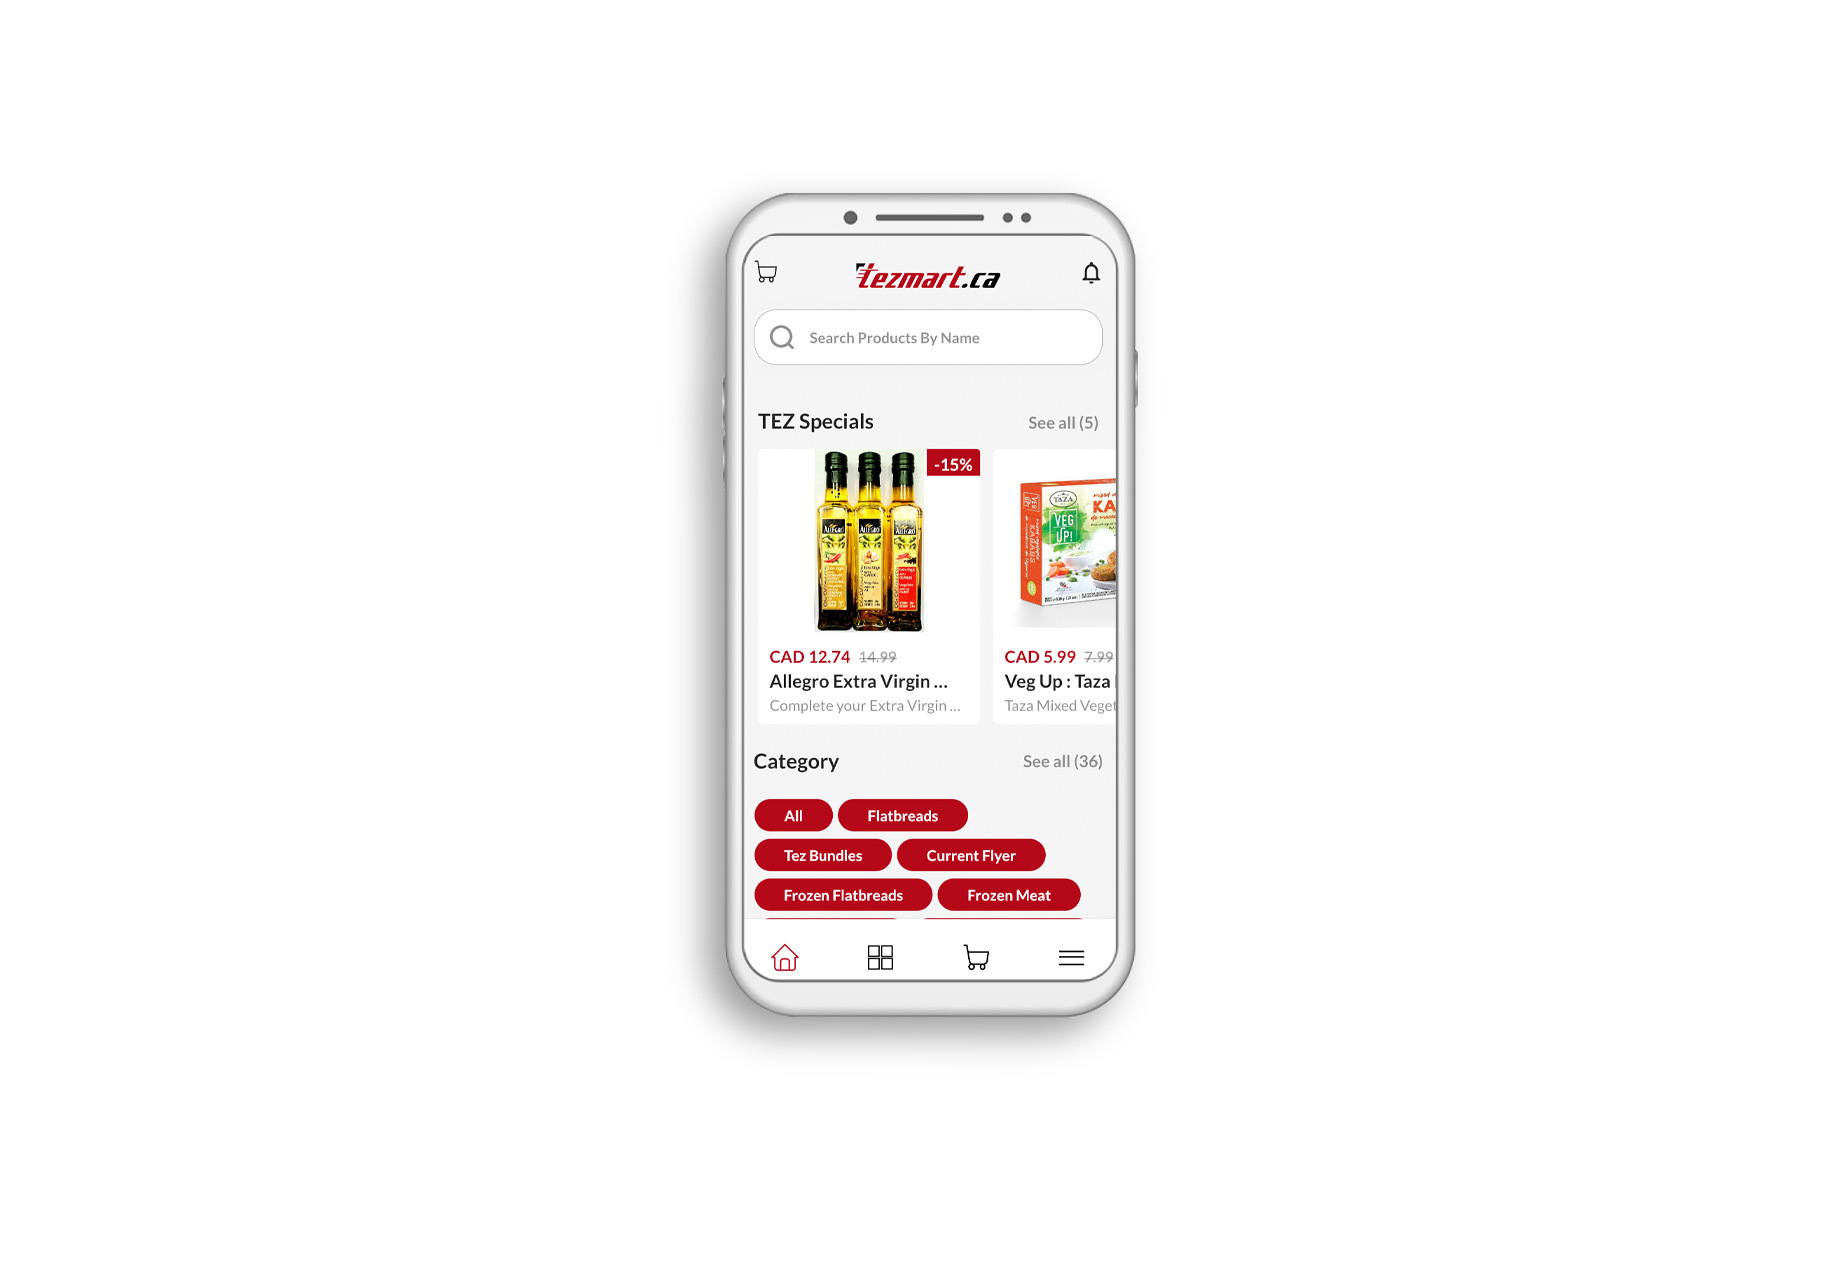 Tezmart Canada's Android App powered by tossdown